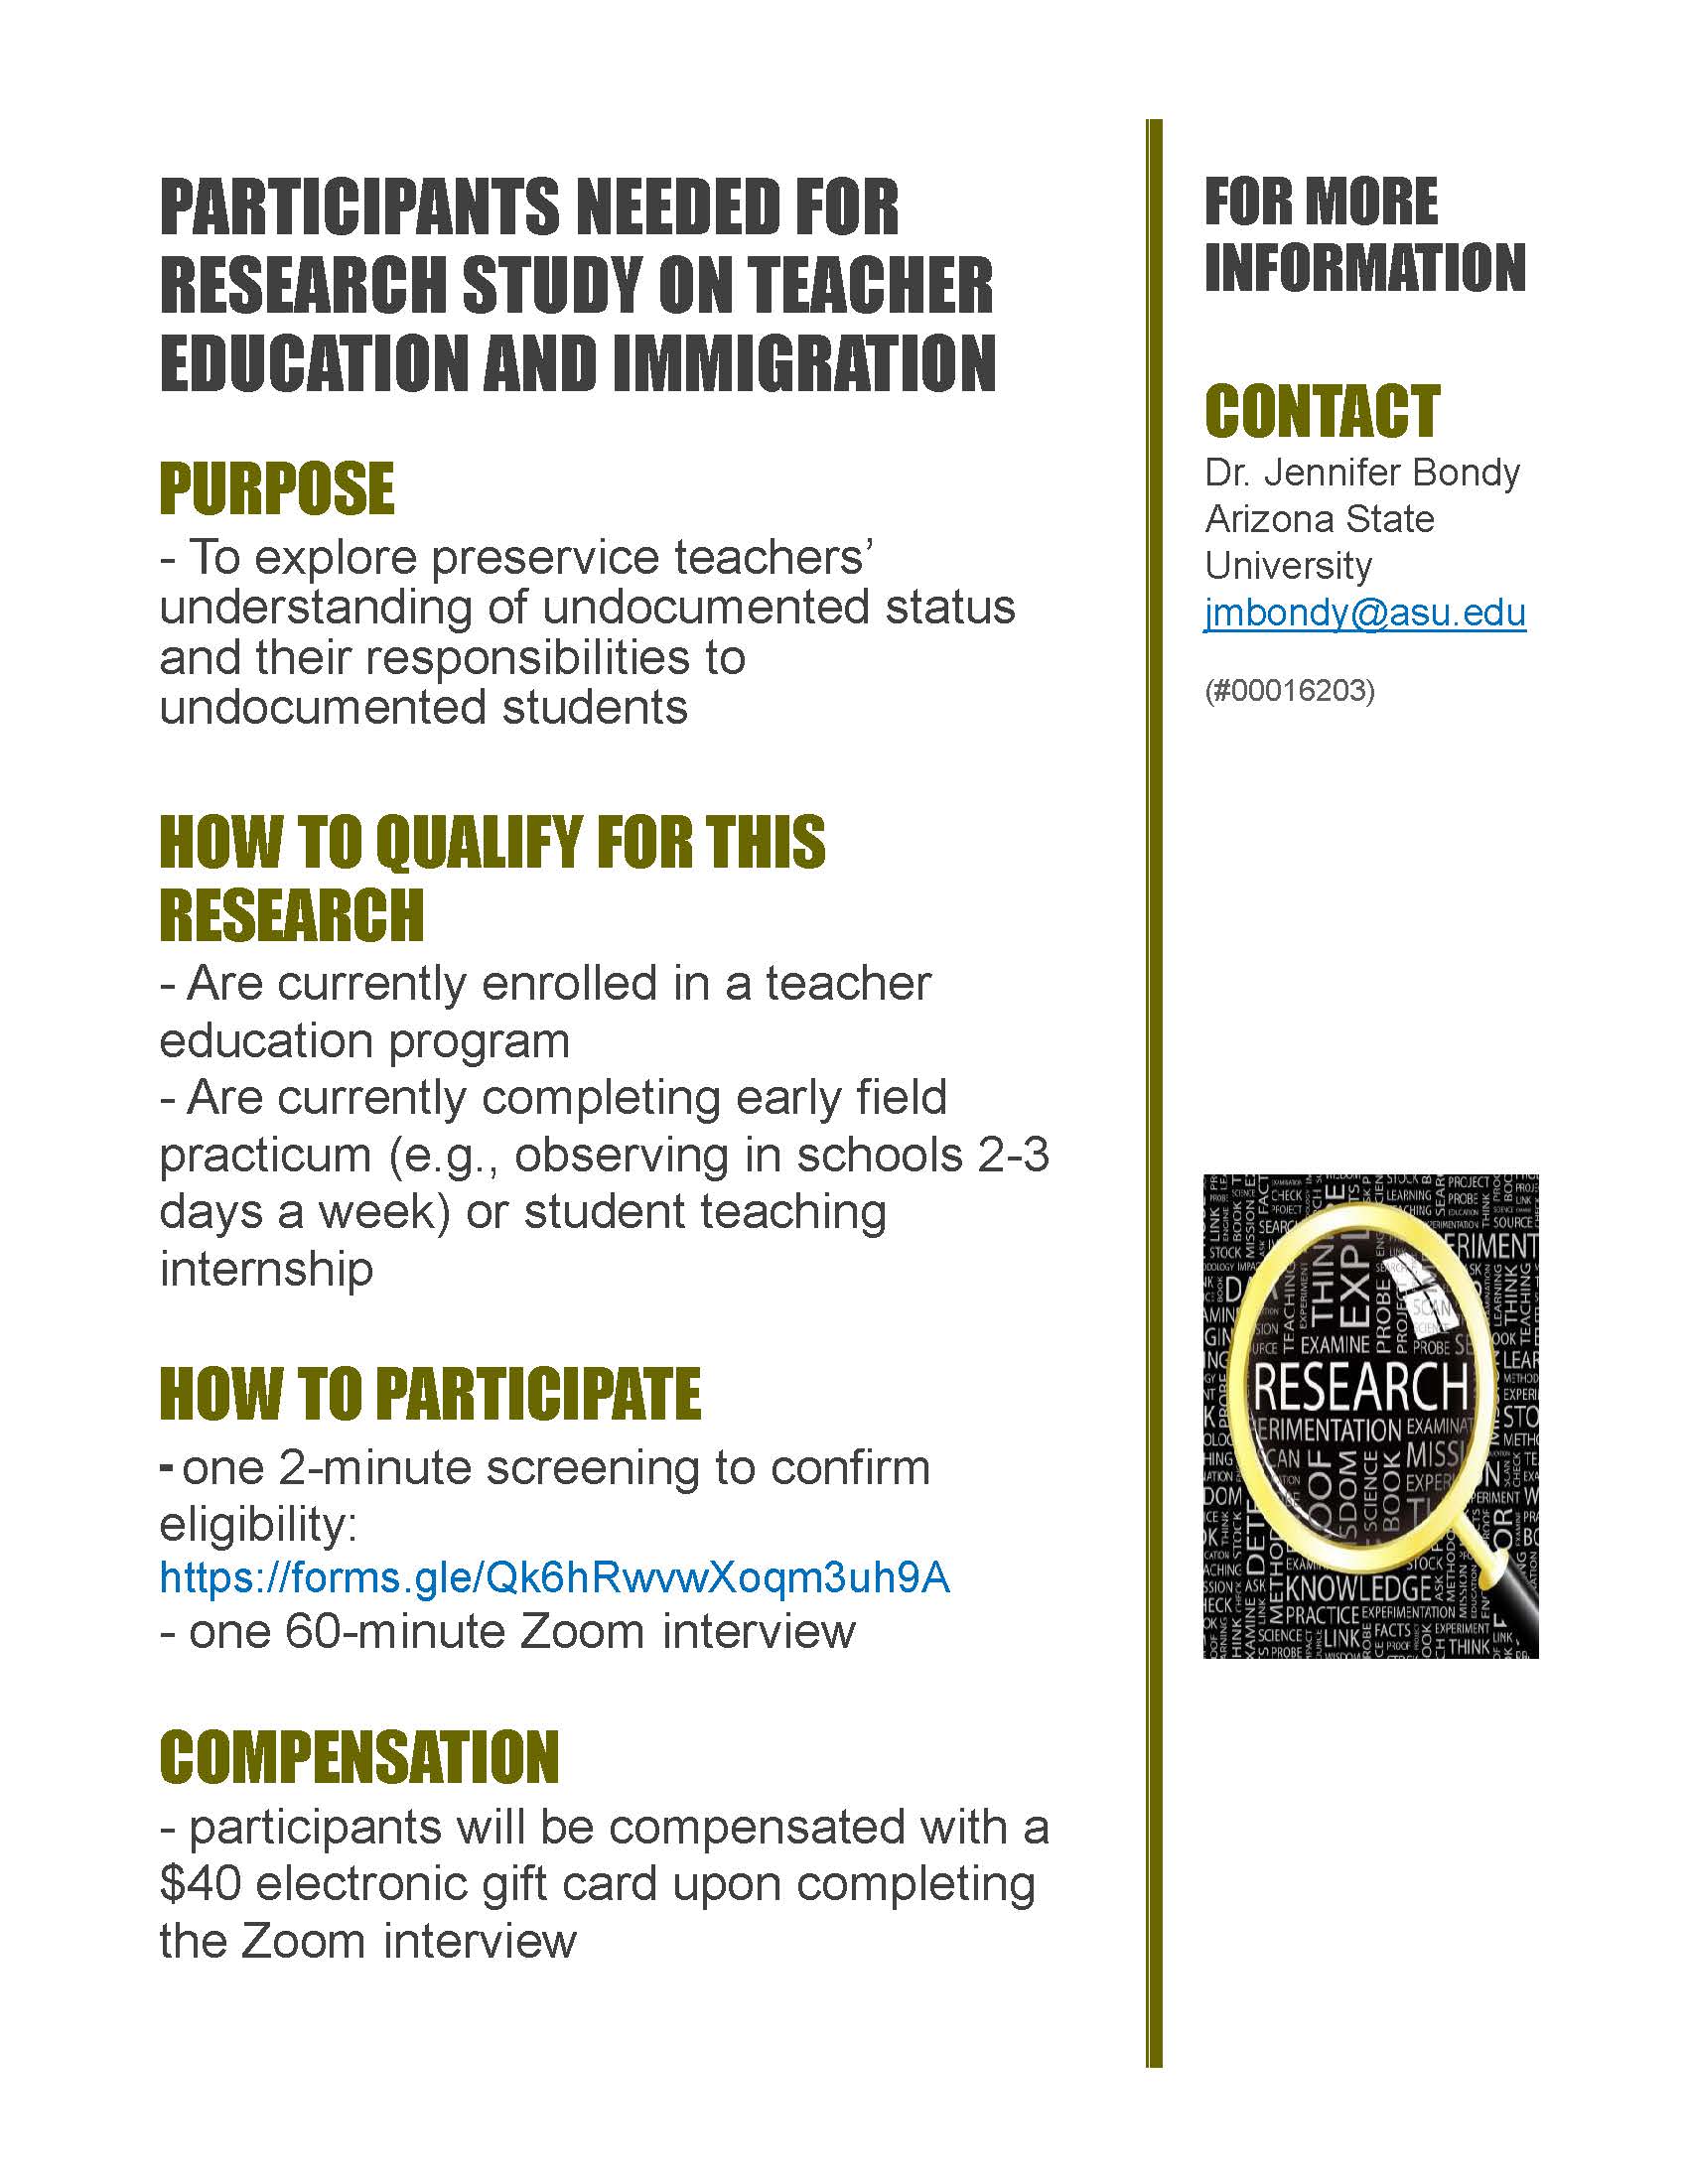 Flyer for the research study and a link to a form for participation. The flyer also has contact information.